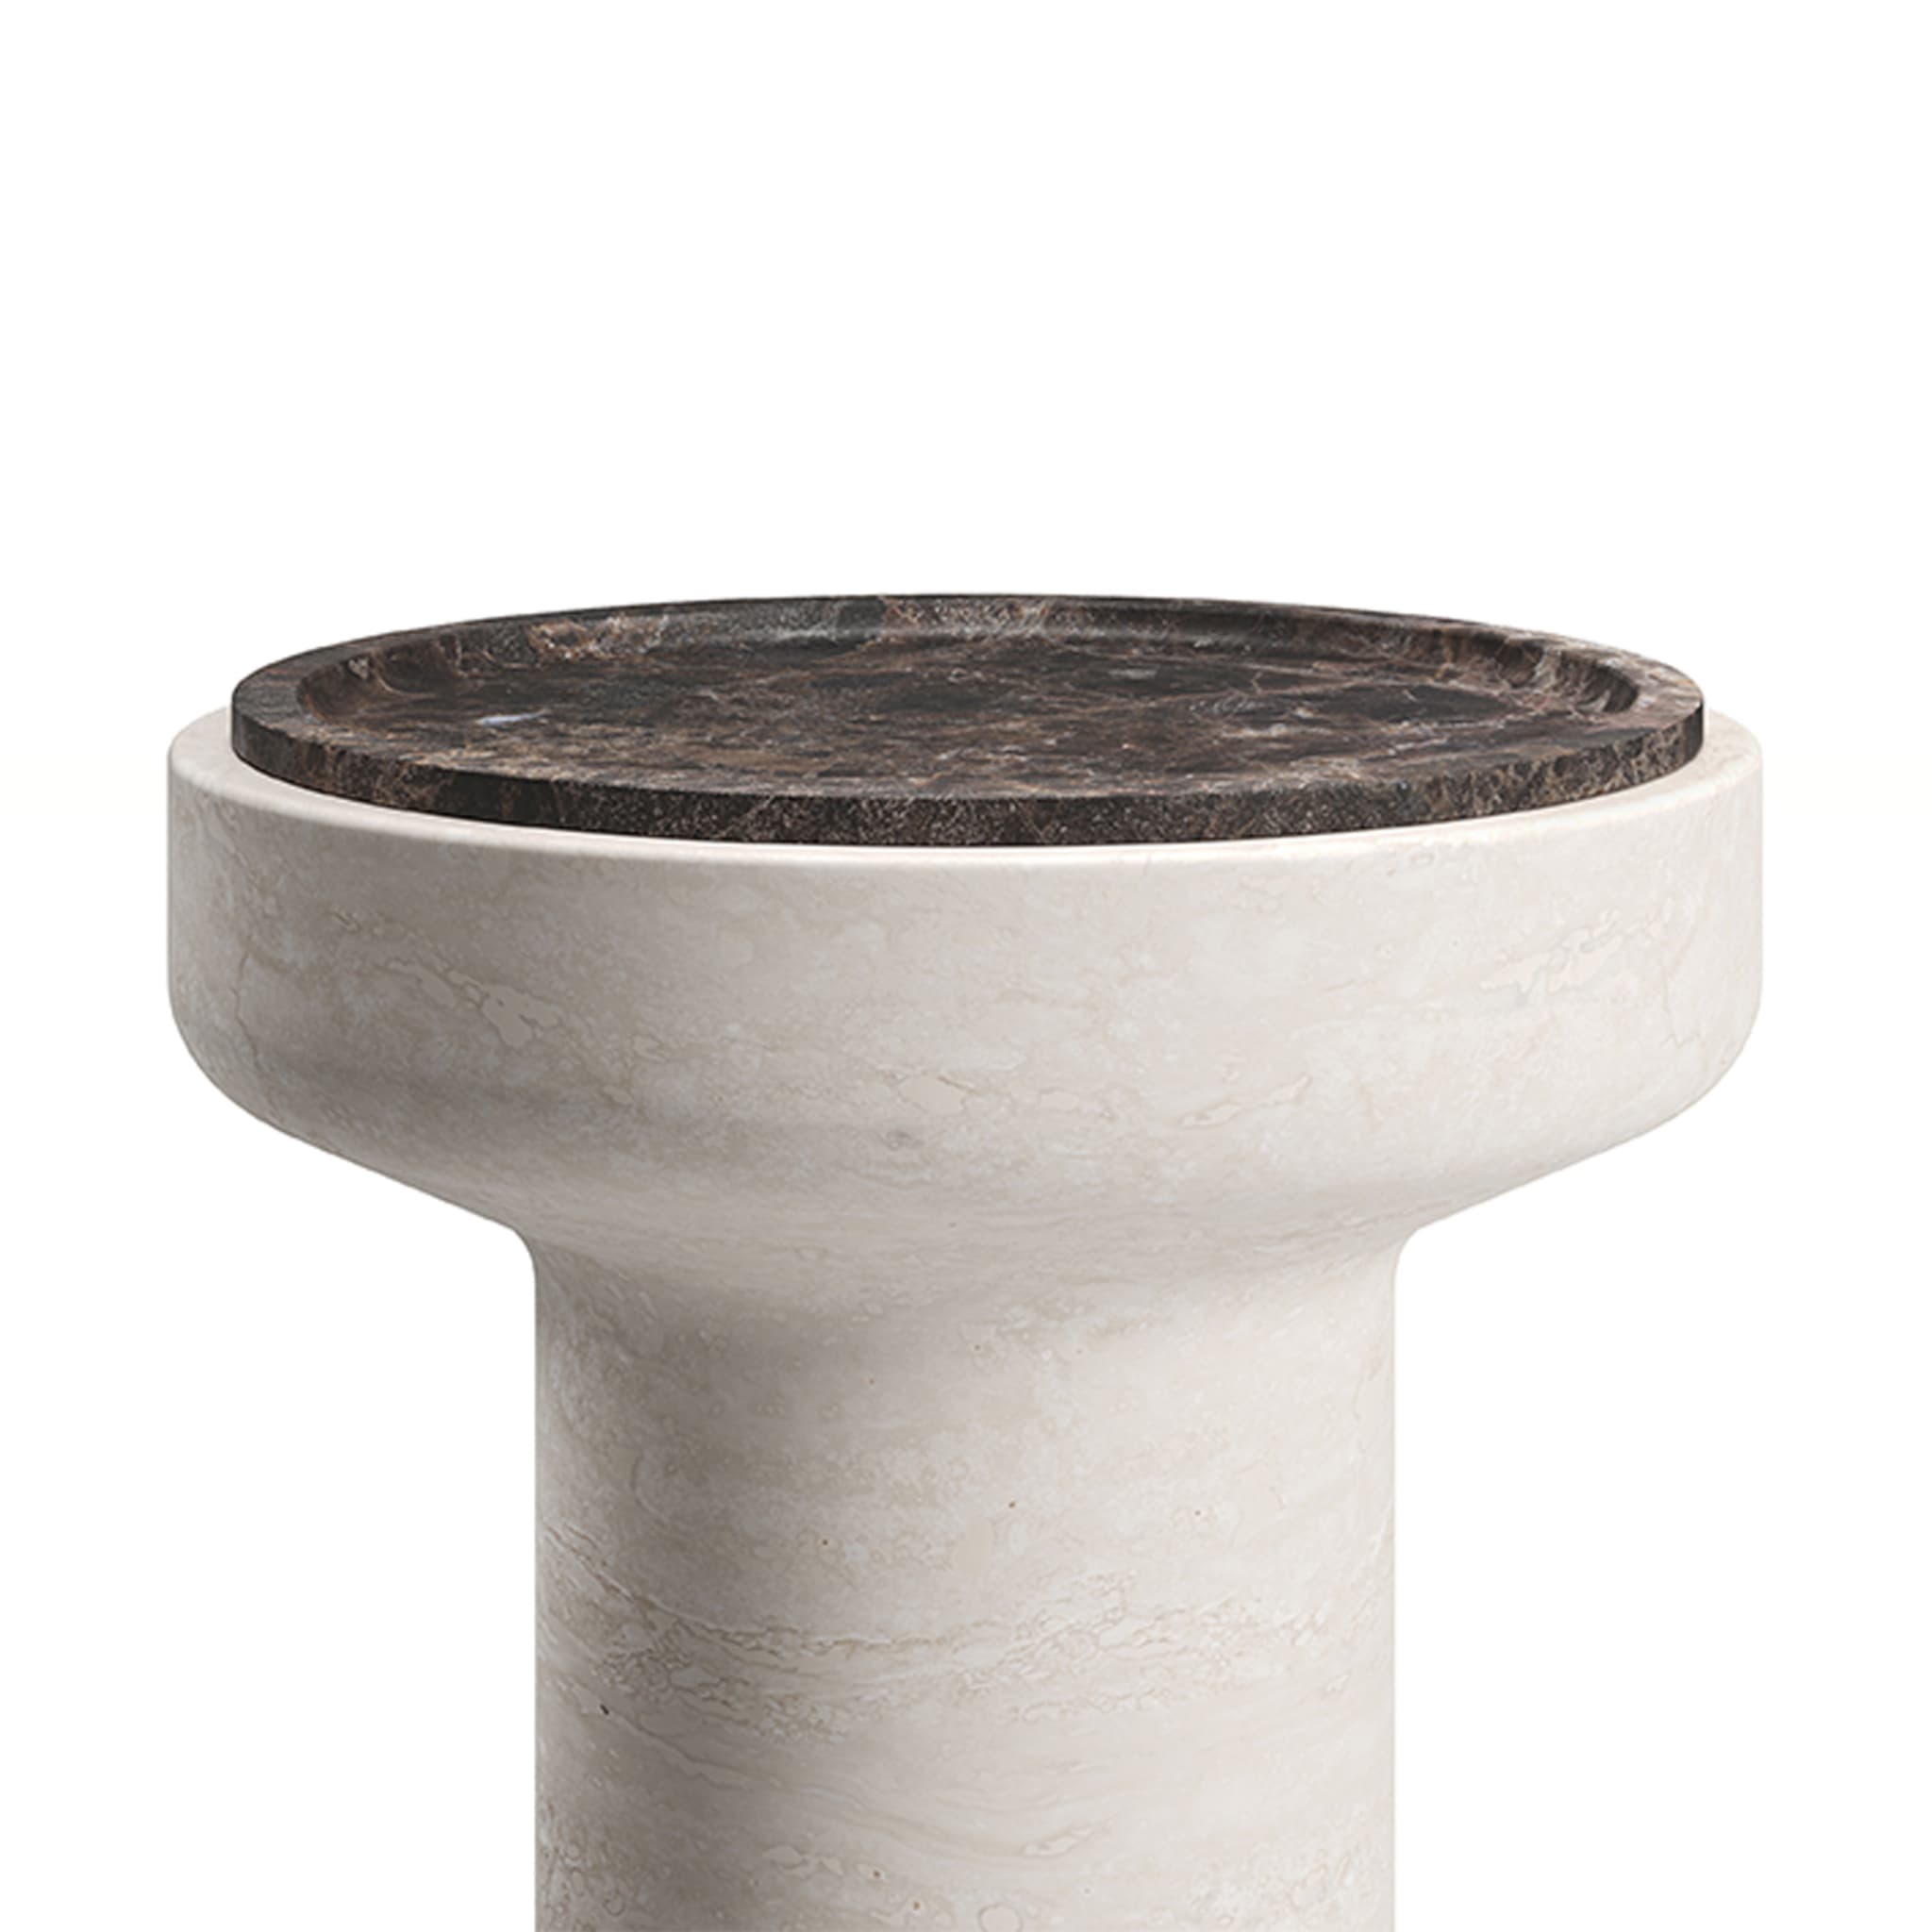 Tivoli Side Table in travertine and marble by Ivan Colominas - Alternative view 1